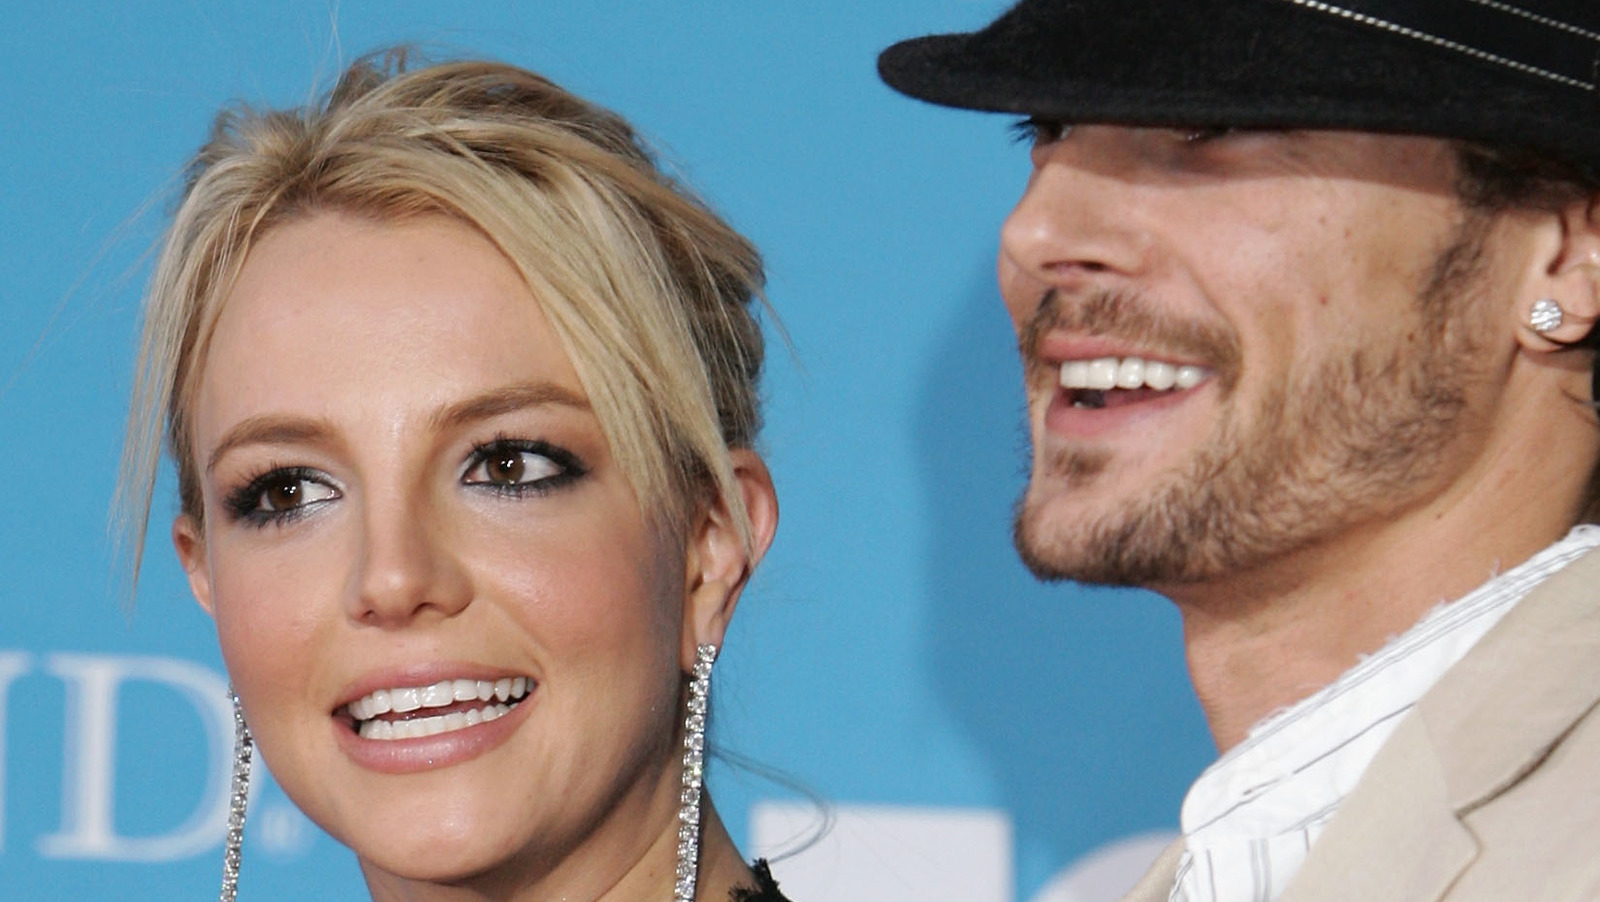 Britney Spears and Kevin Federline in 2004